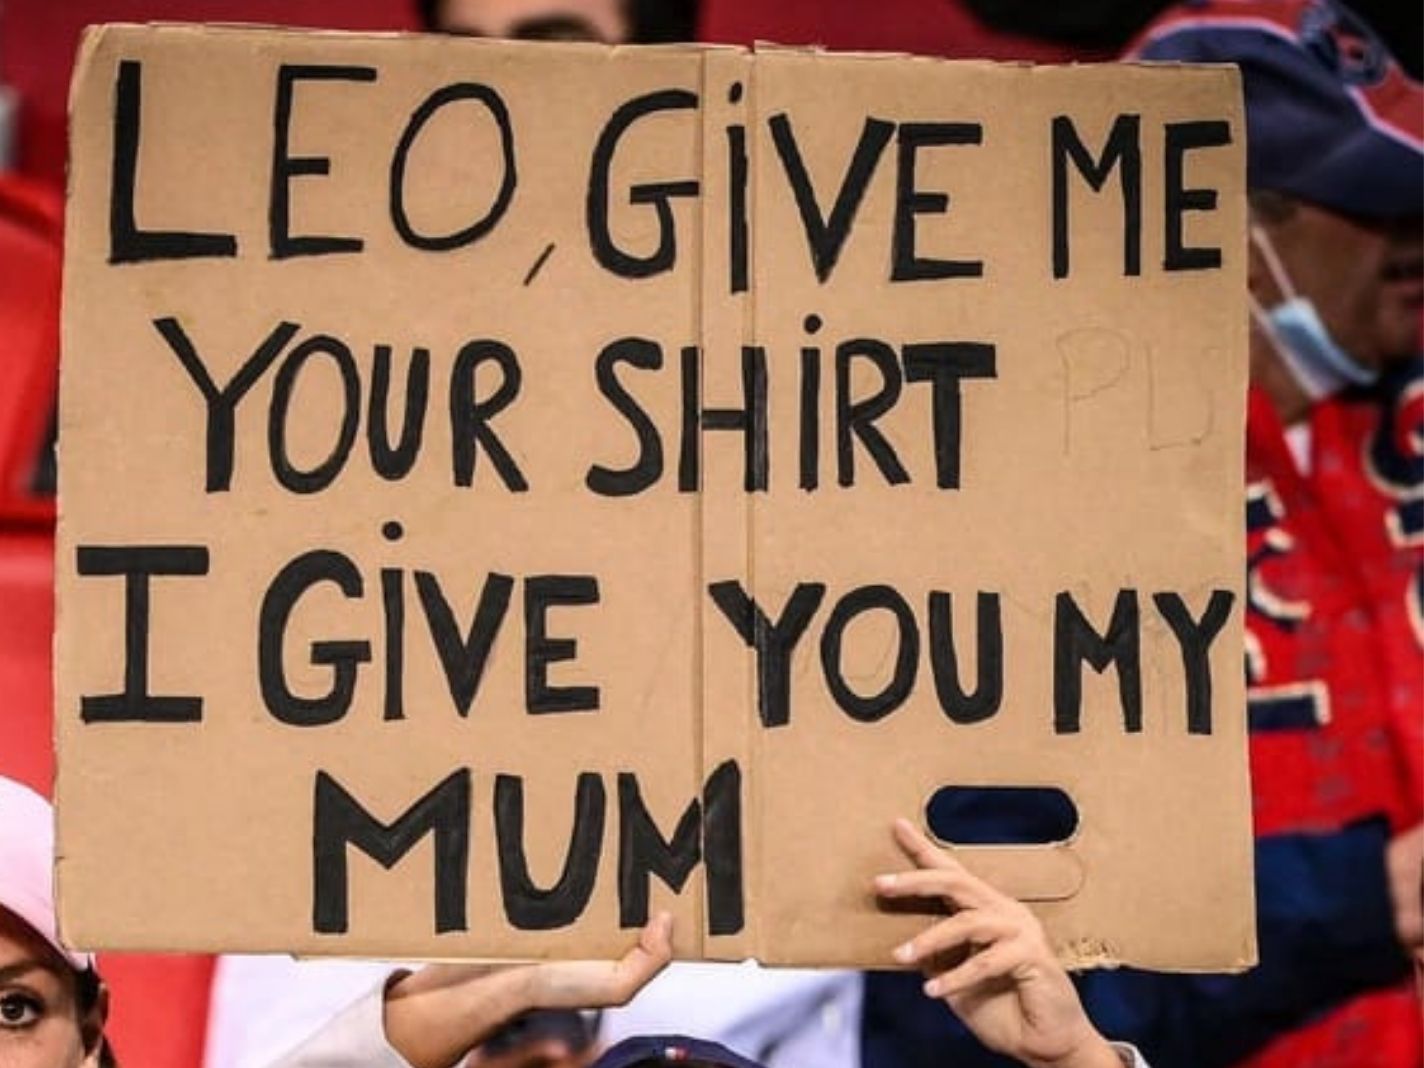 Twitter slams the recent influx of ‘can I have your shirt’ banners in football